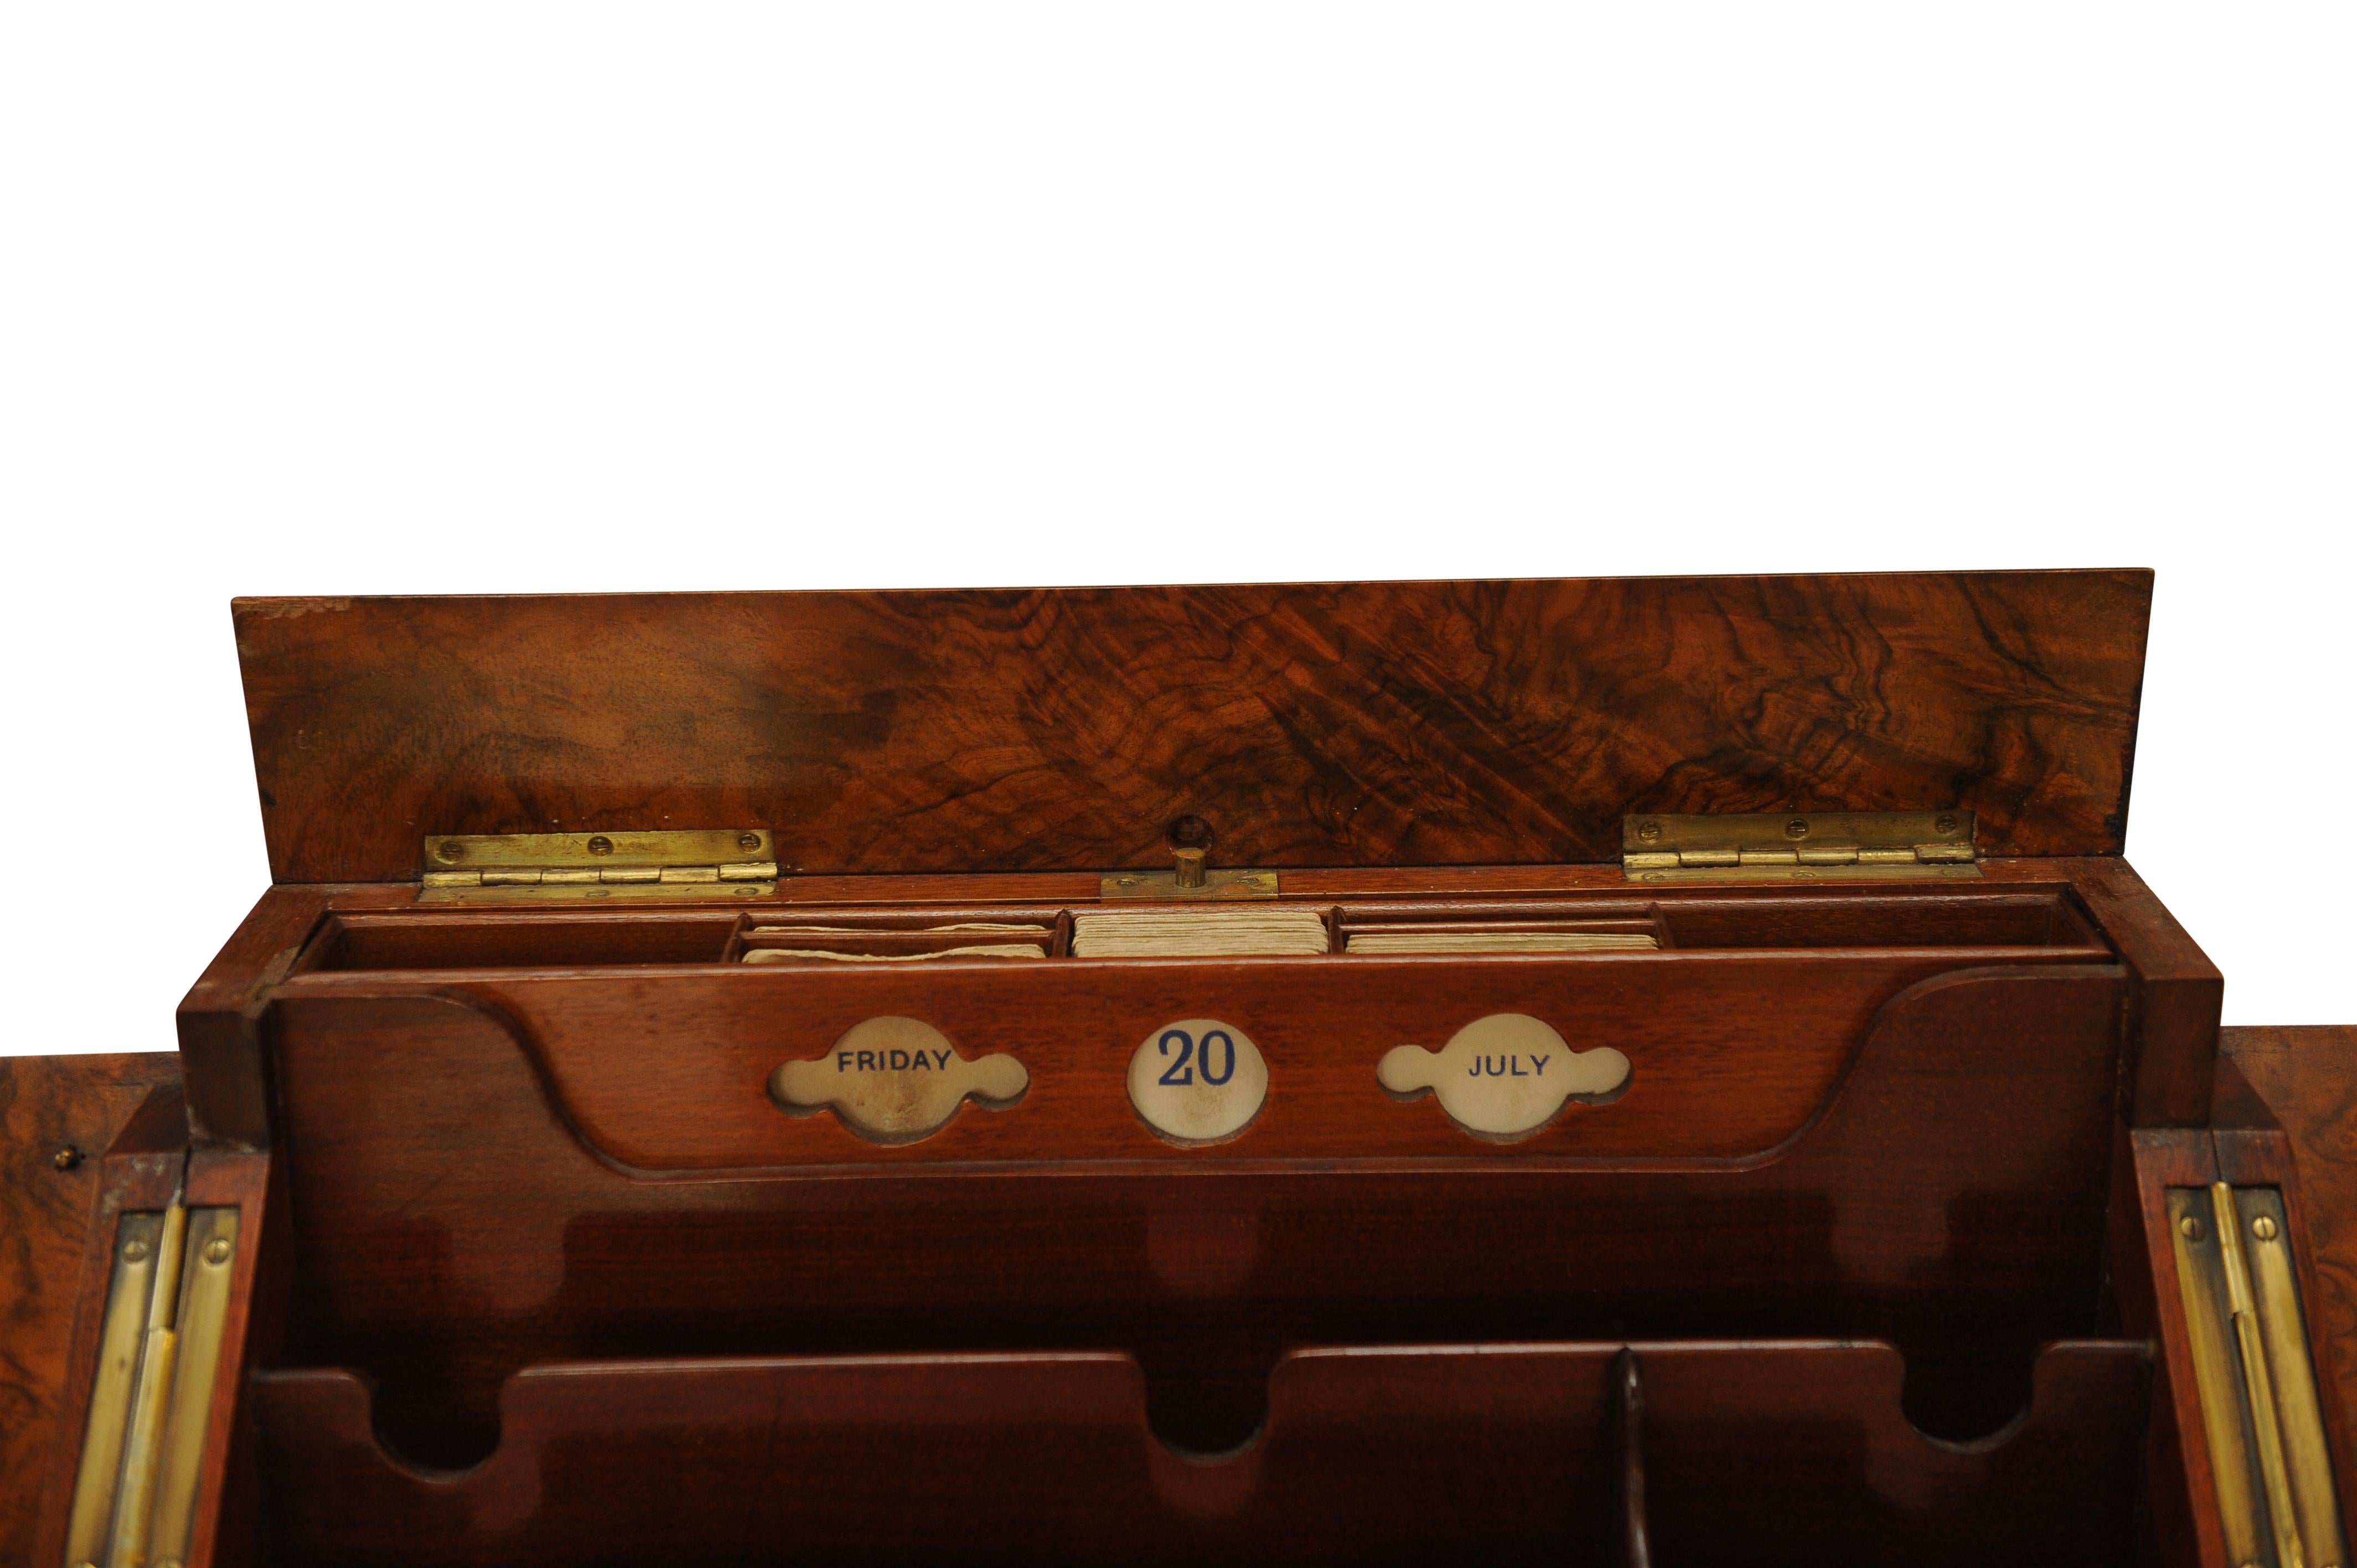 Art Deco, Edwardian Burr Walnut Desk Organizer, Includes Calendar and Storage.

A Wonderful Example of Craftsmanship, That Will Do Justice To Any Desk or Study.